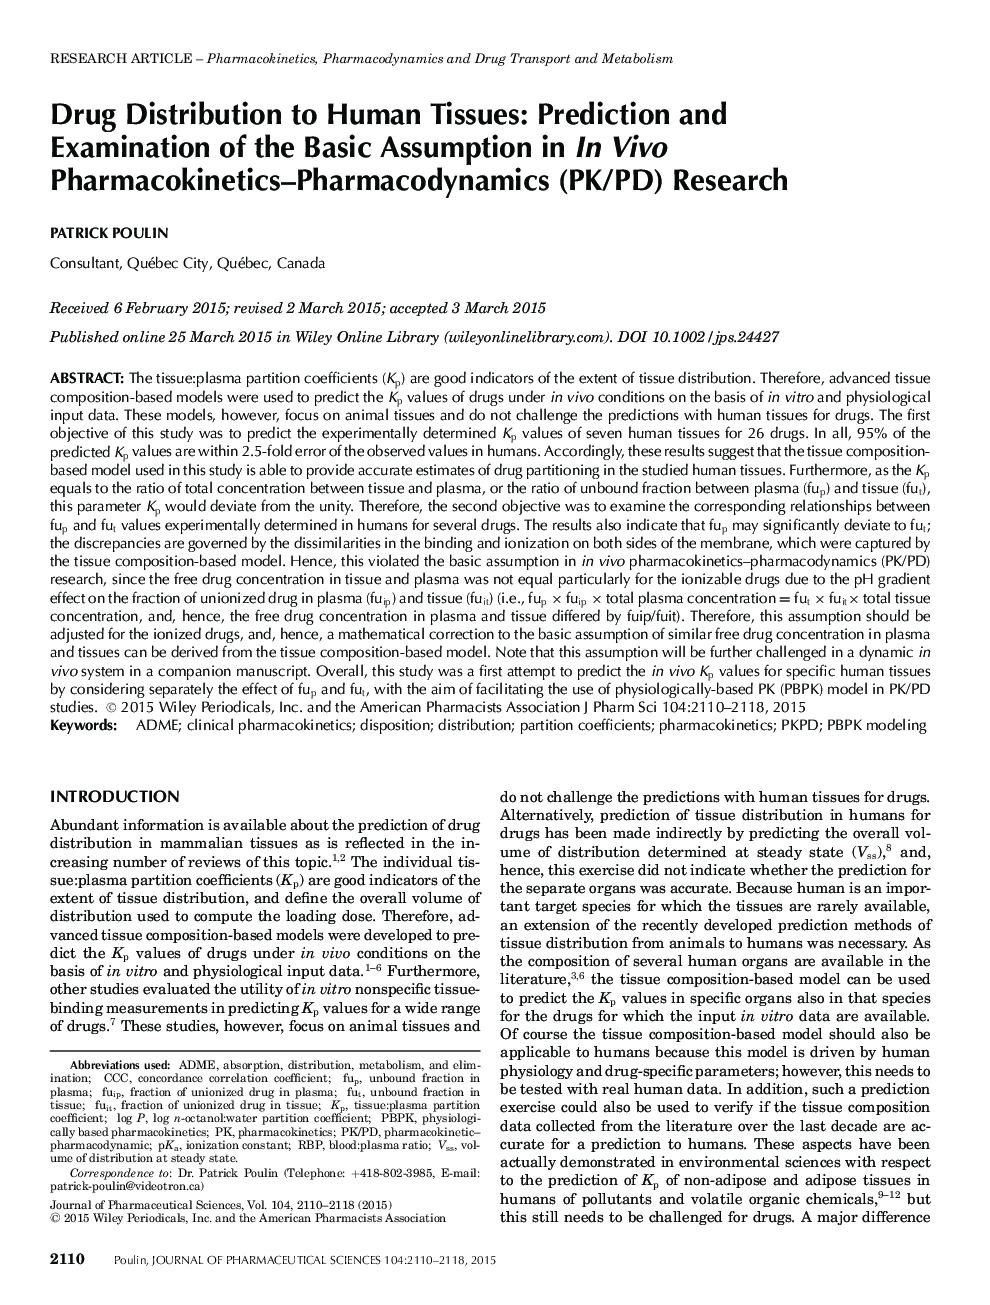 Drug Distribution to Human Tissues: Prediction and Examination of the Basic Assumption in In Vivo Pharmacokinetics-Pharmacodynamics (PK/PD) Research